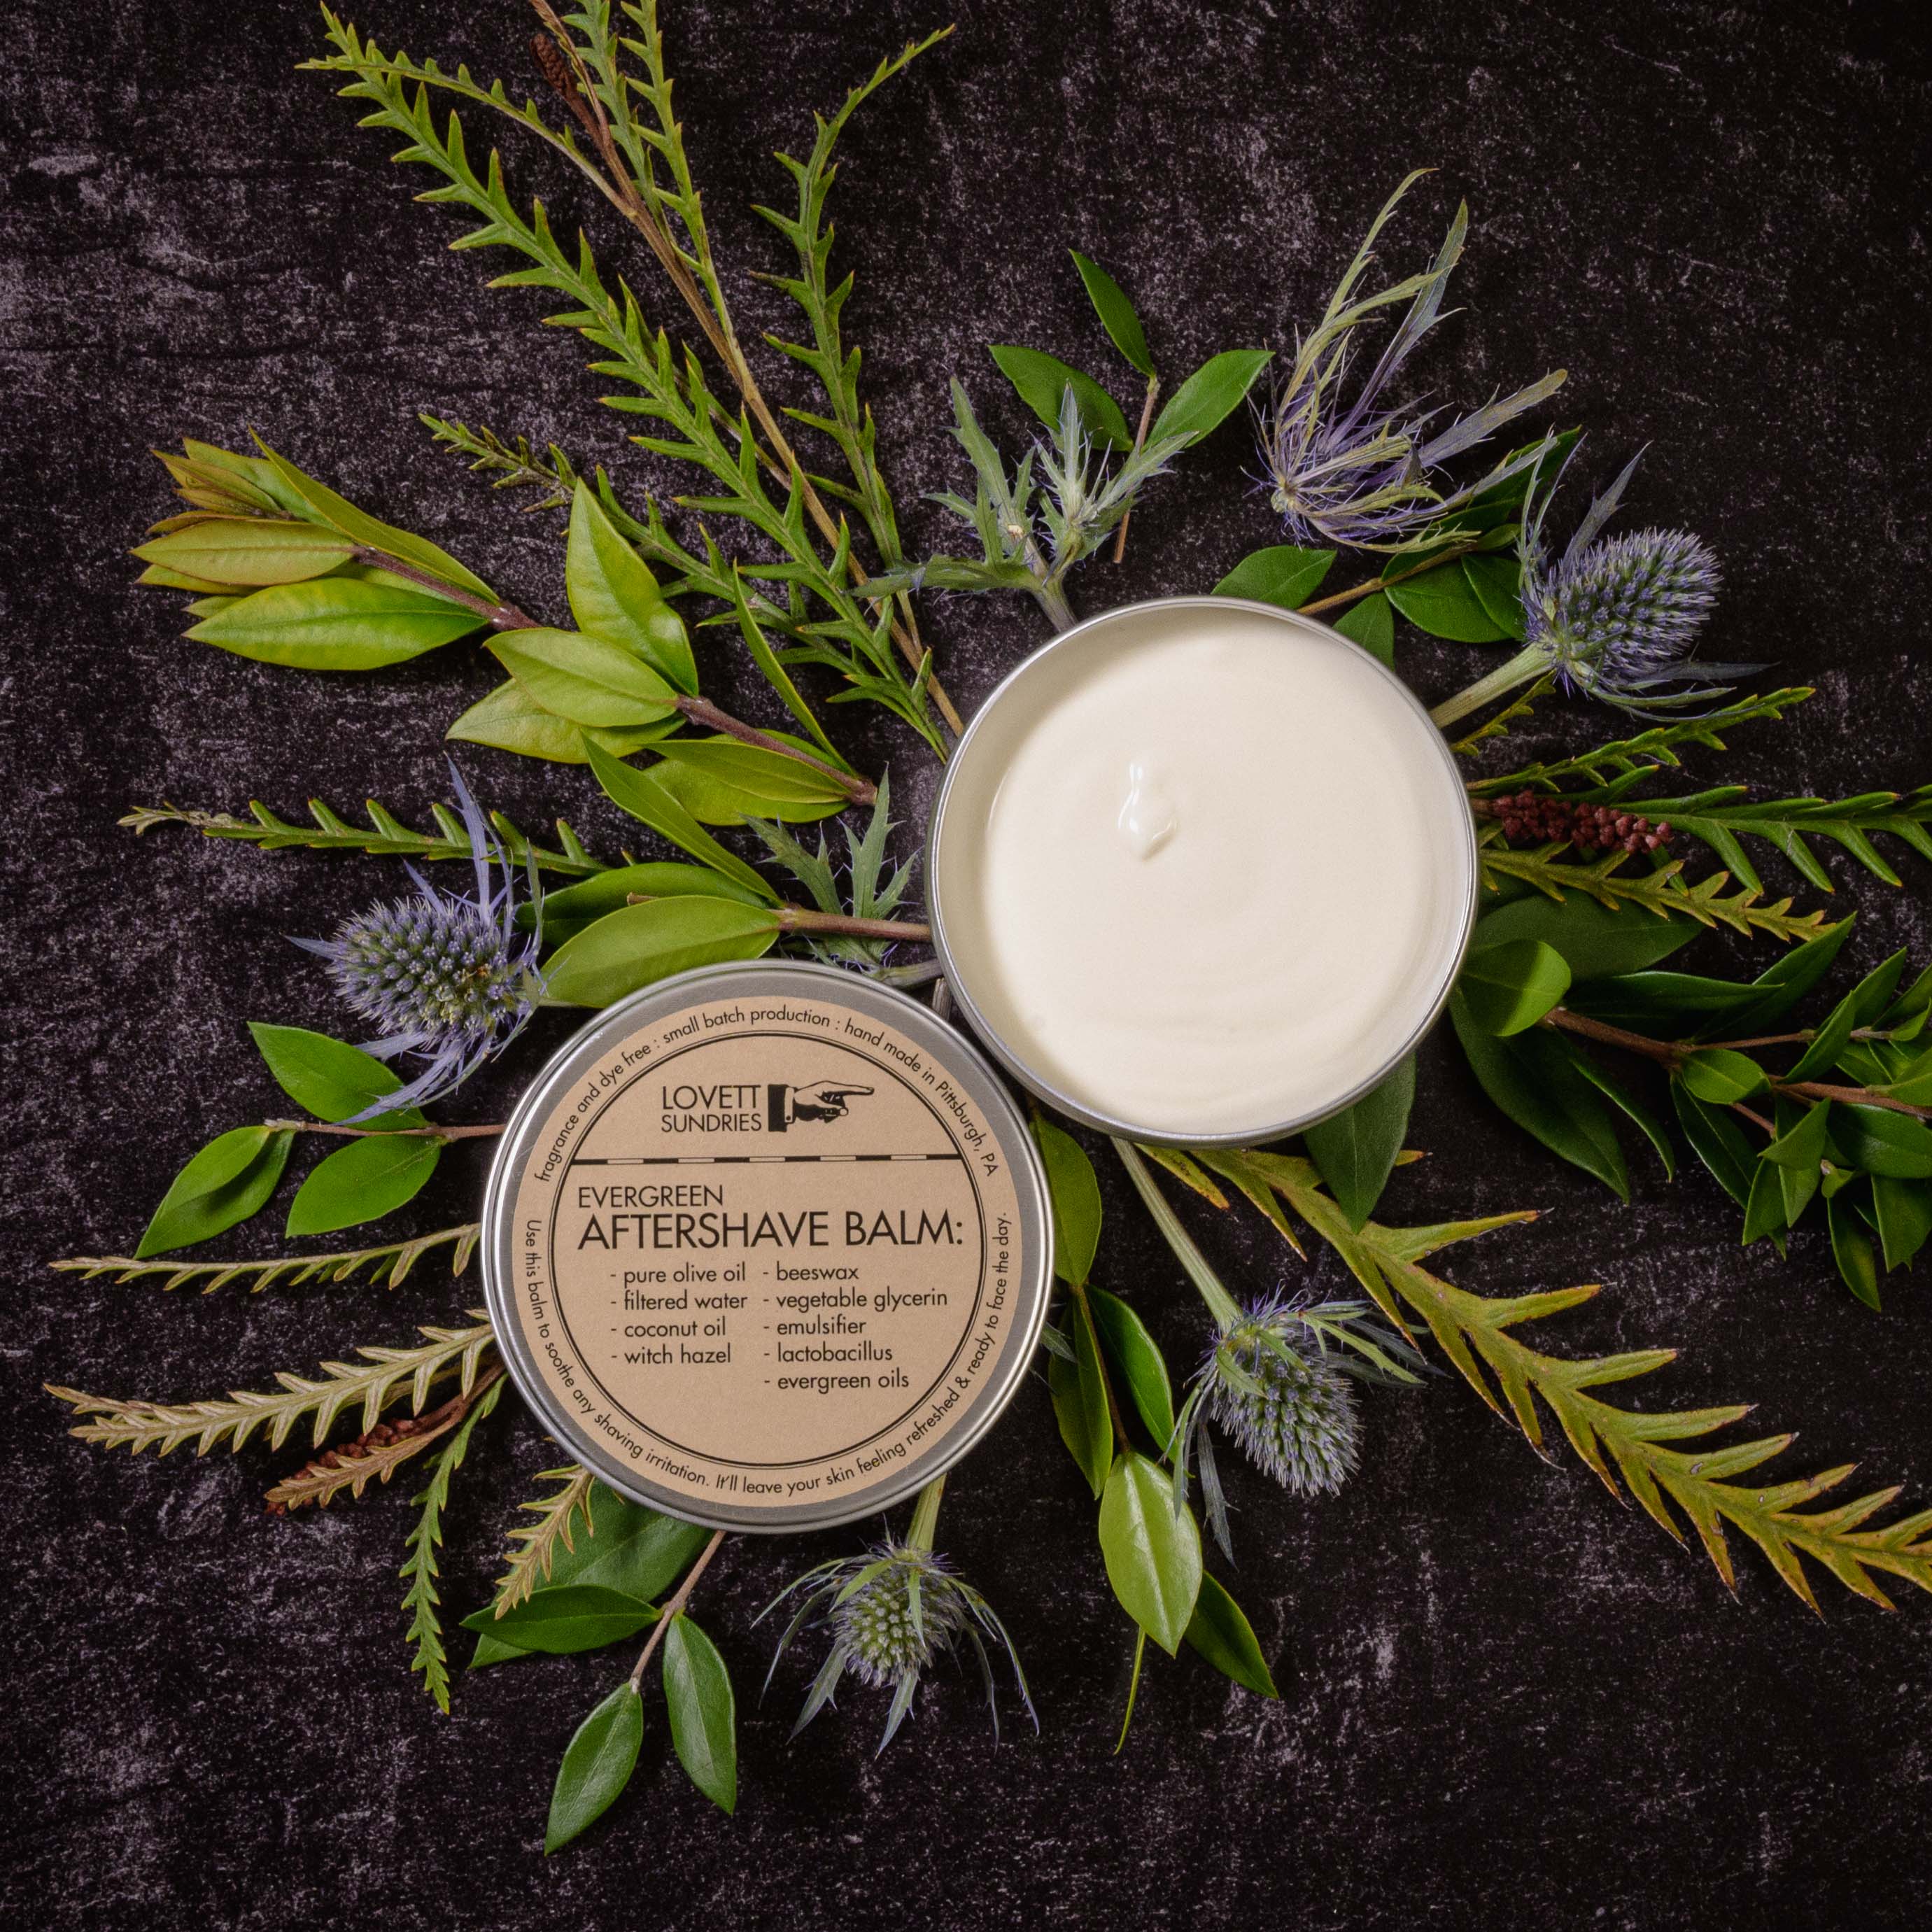 A tin of natural evergreen aftershave balm set on top of flowers.